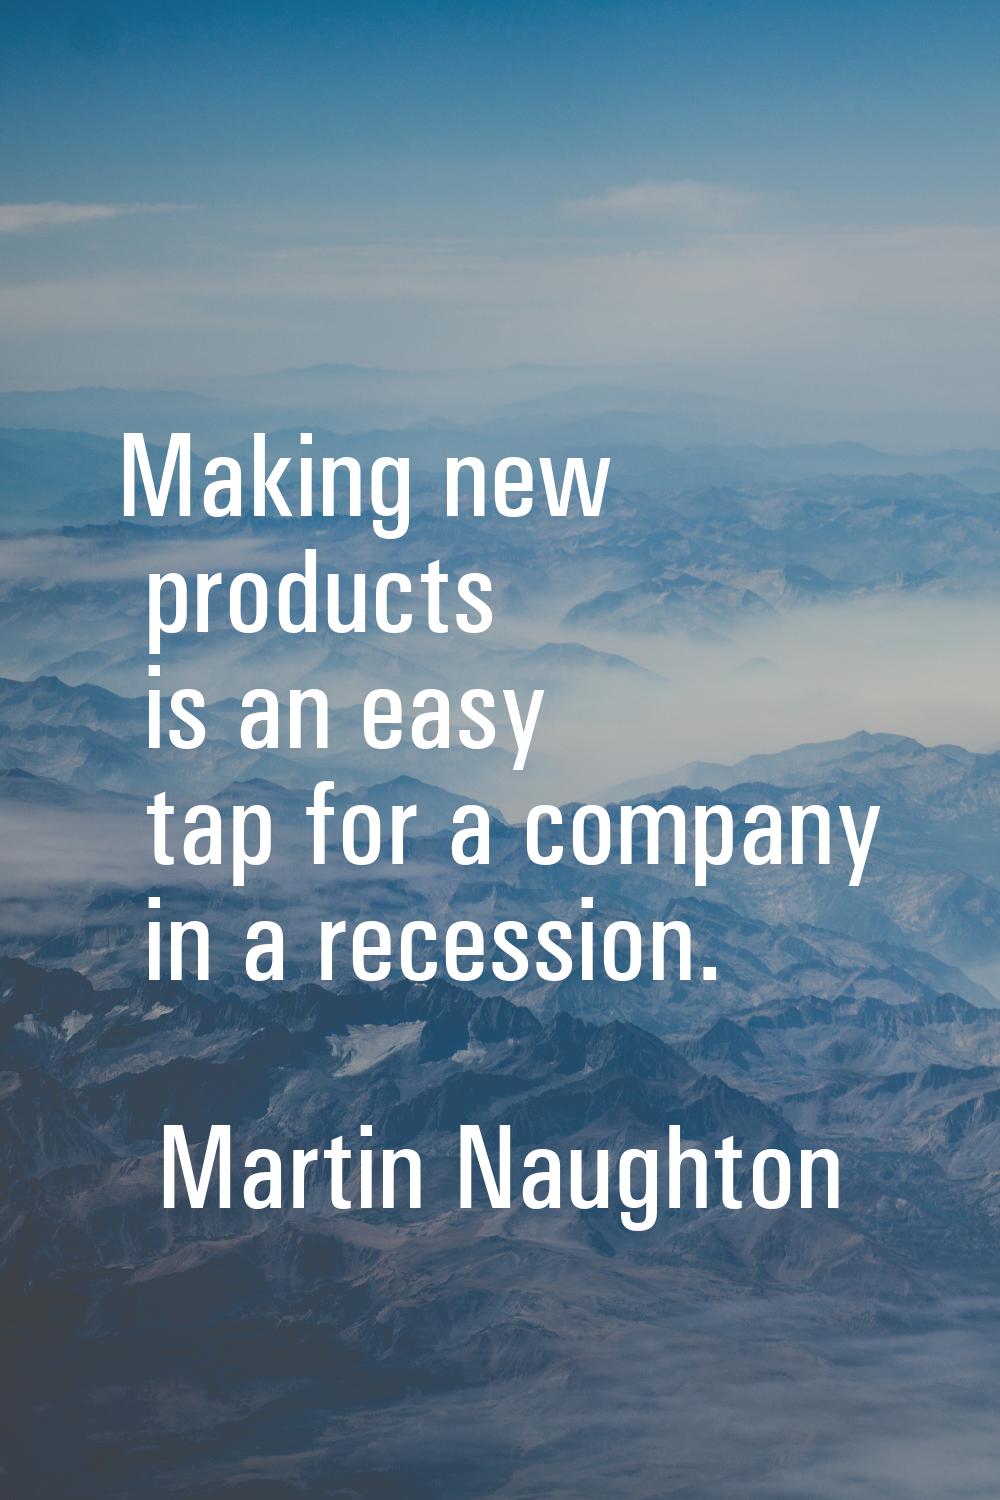 Making new products is an easy tap for a company in a recession.